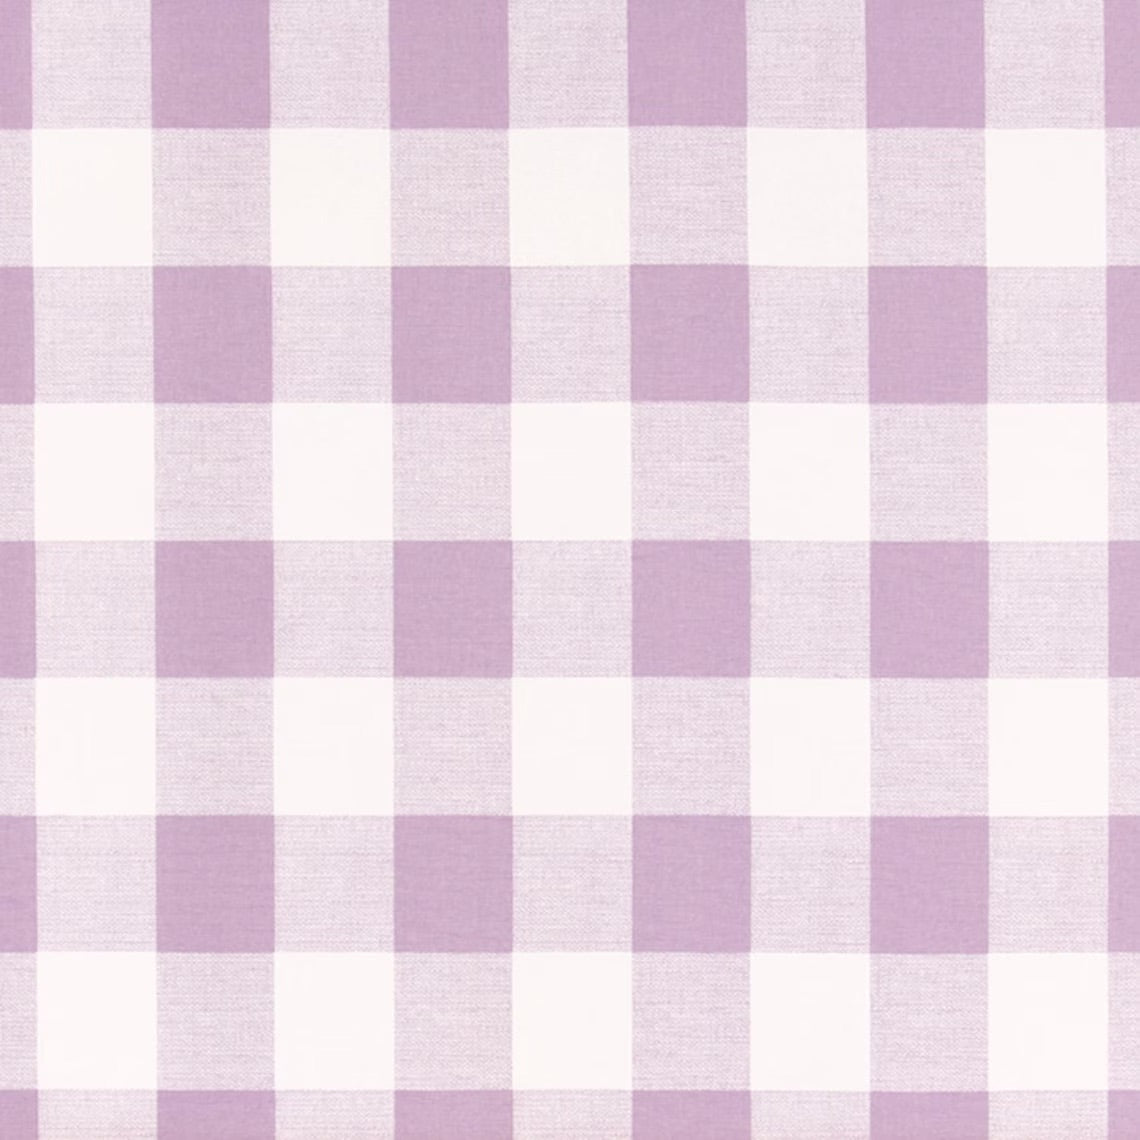 Pinch Pleated Curtains in Anderson Orchid Lavender Buffalo Check Plaid